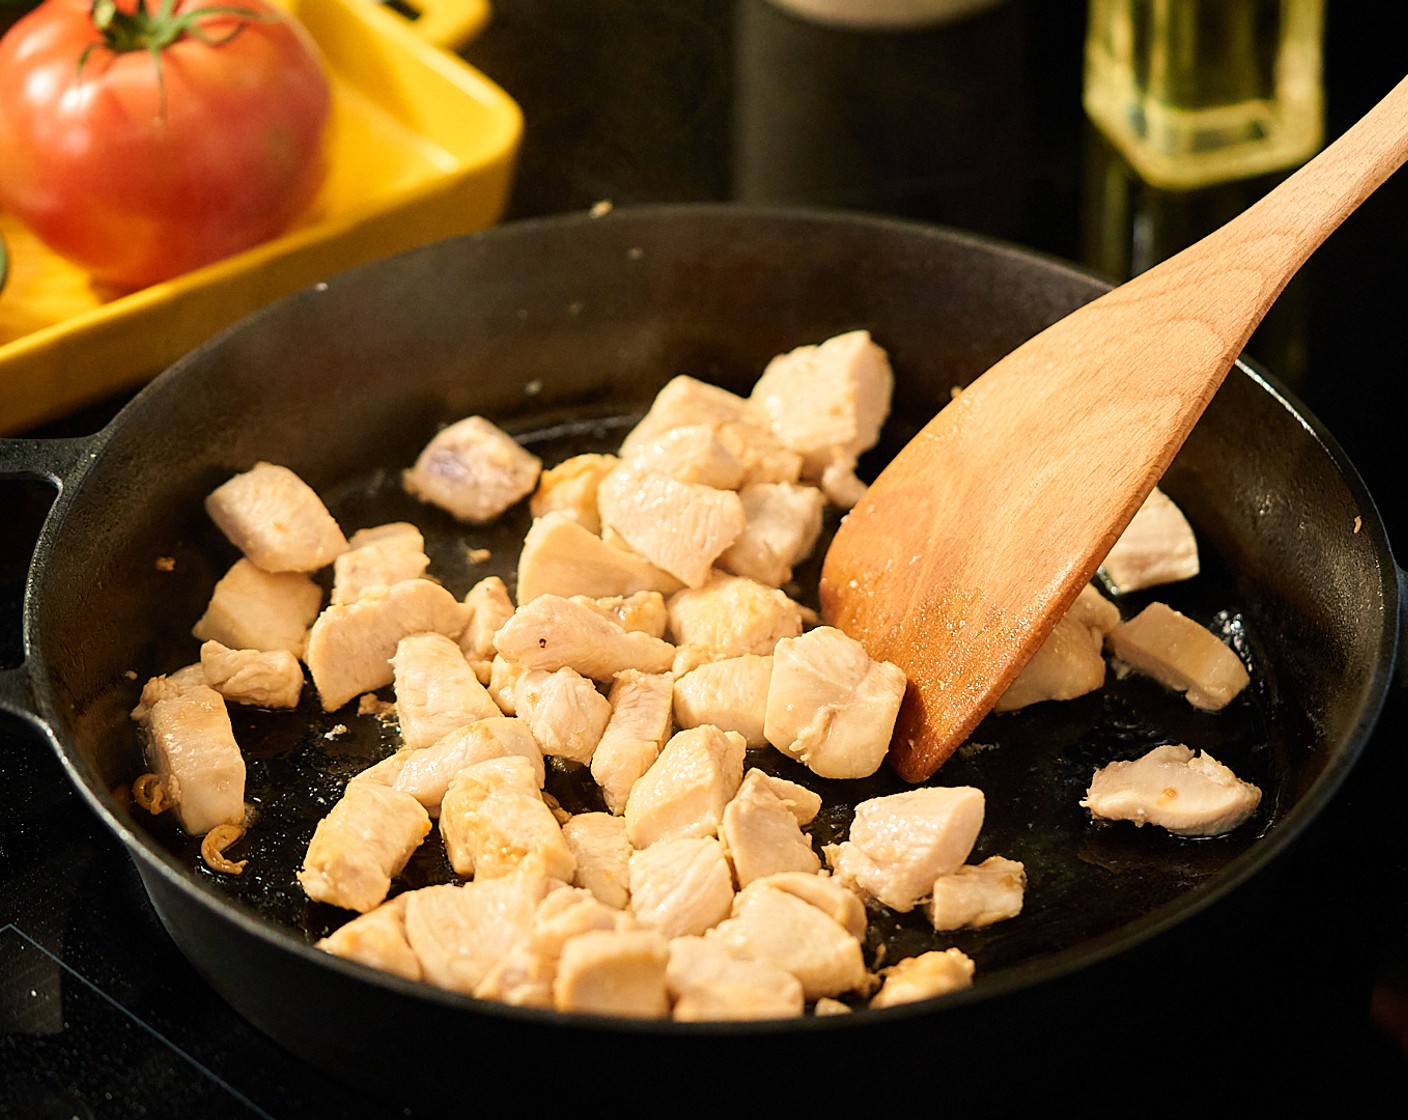 step 3 In a 12-inch cast-iron or another oven-safe skillet, heat Vegetable Oil (1 Tbsp) over medium-high heat. Once hot, sear chicken until no longer pink and beginning to get some golden color on the outside.